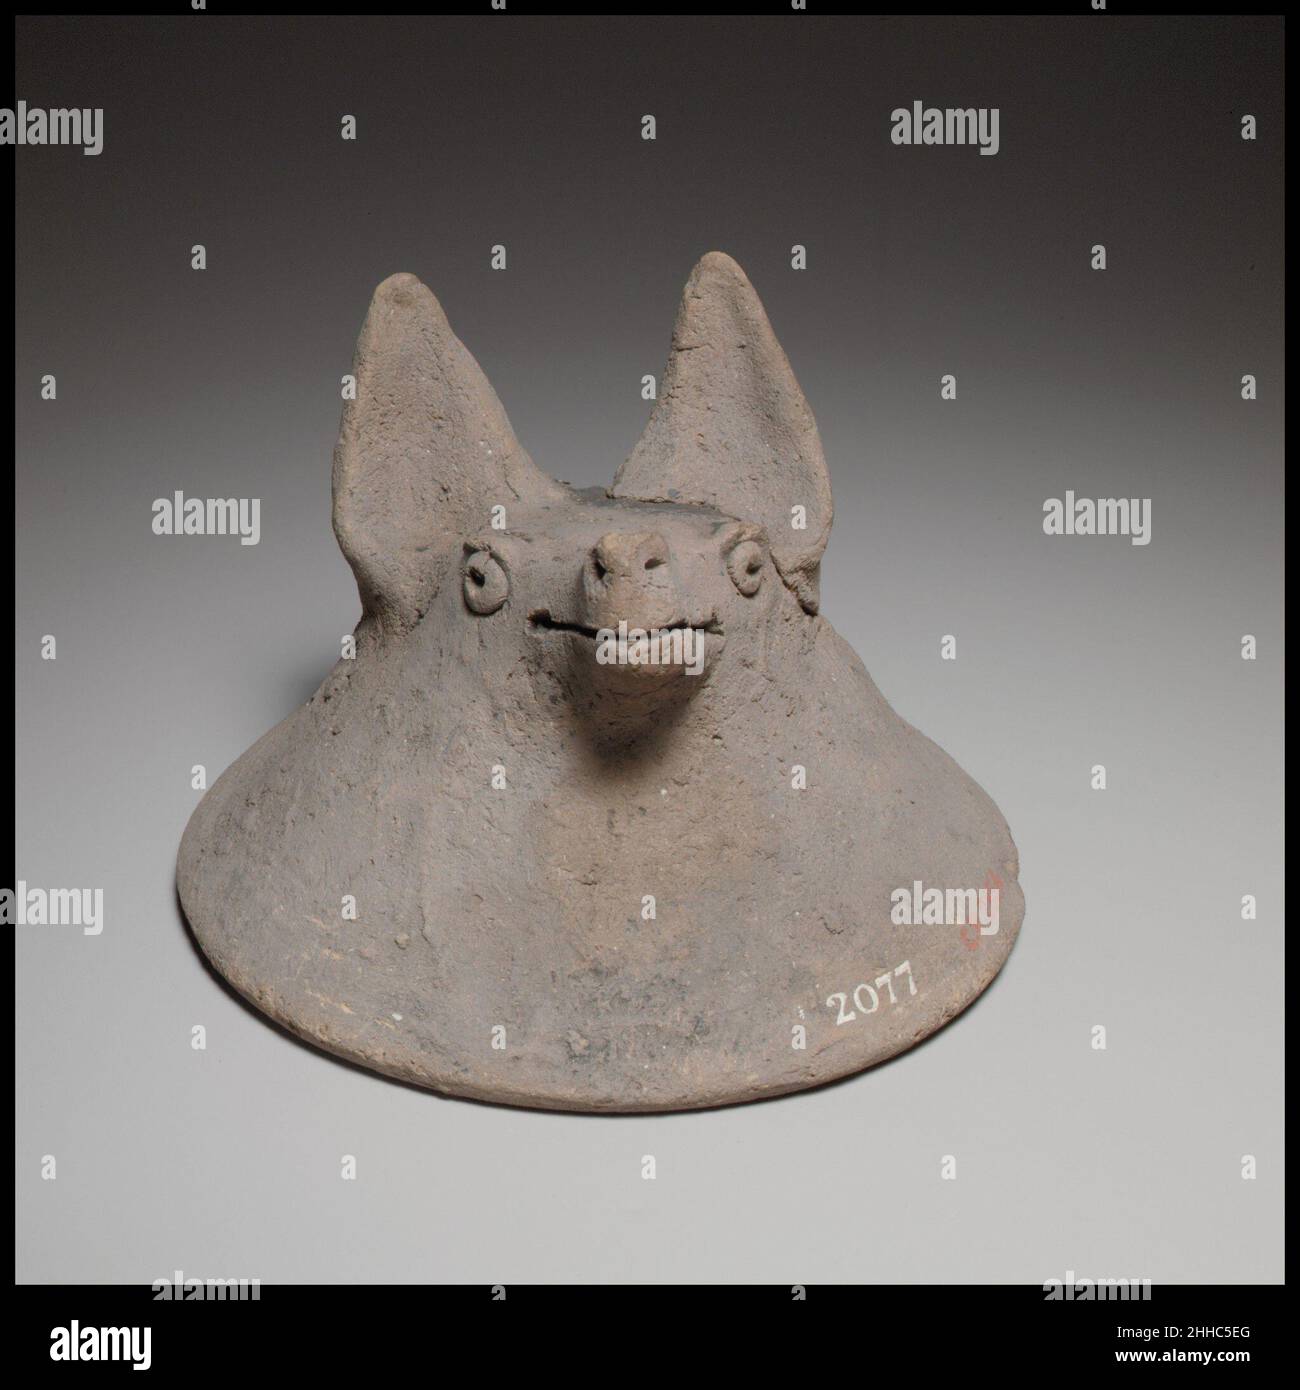 Terracotta mask in the shape of the head of a fox, dog, or bat ca. 600–480 B.C. Cypriot The mask is handmade. It has a flaring, bell-shaped neck and pellet eyes.. Terracotta mask in the shape of the head of a fox, dog, or bat  241316 Stock Photo